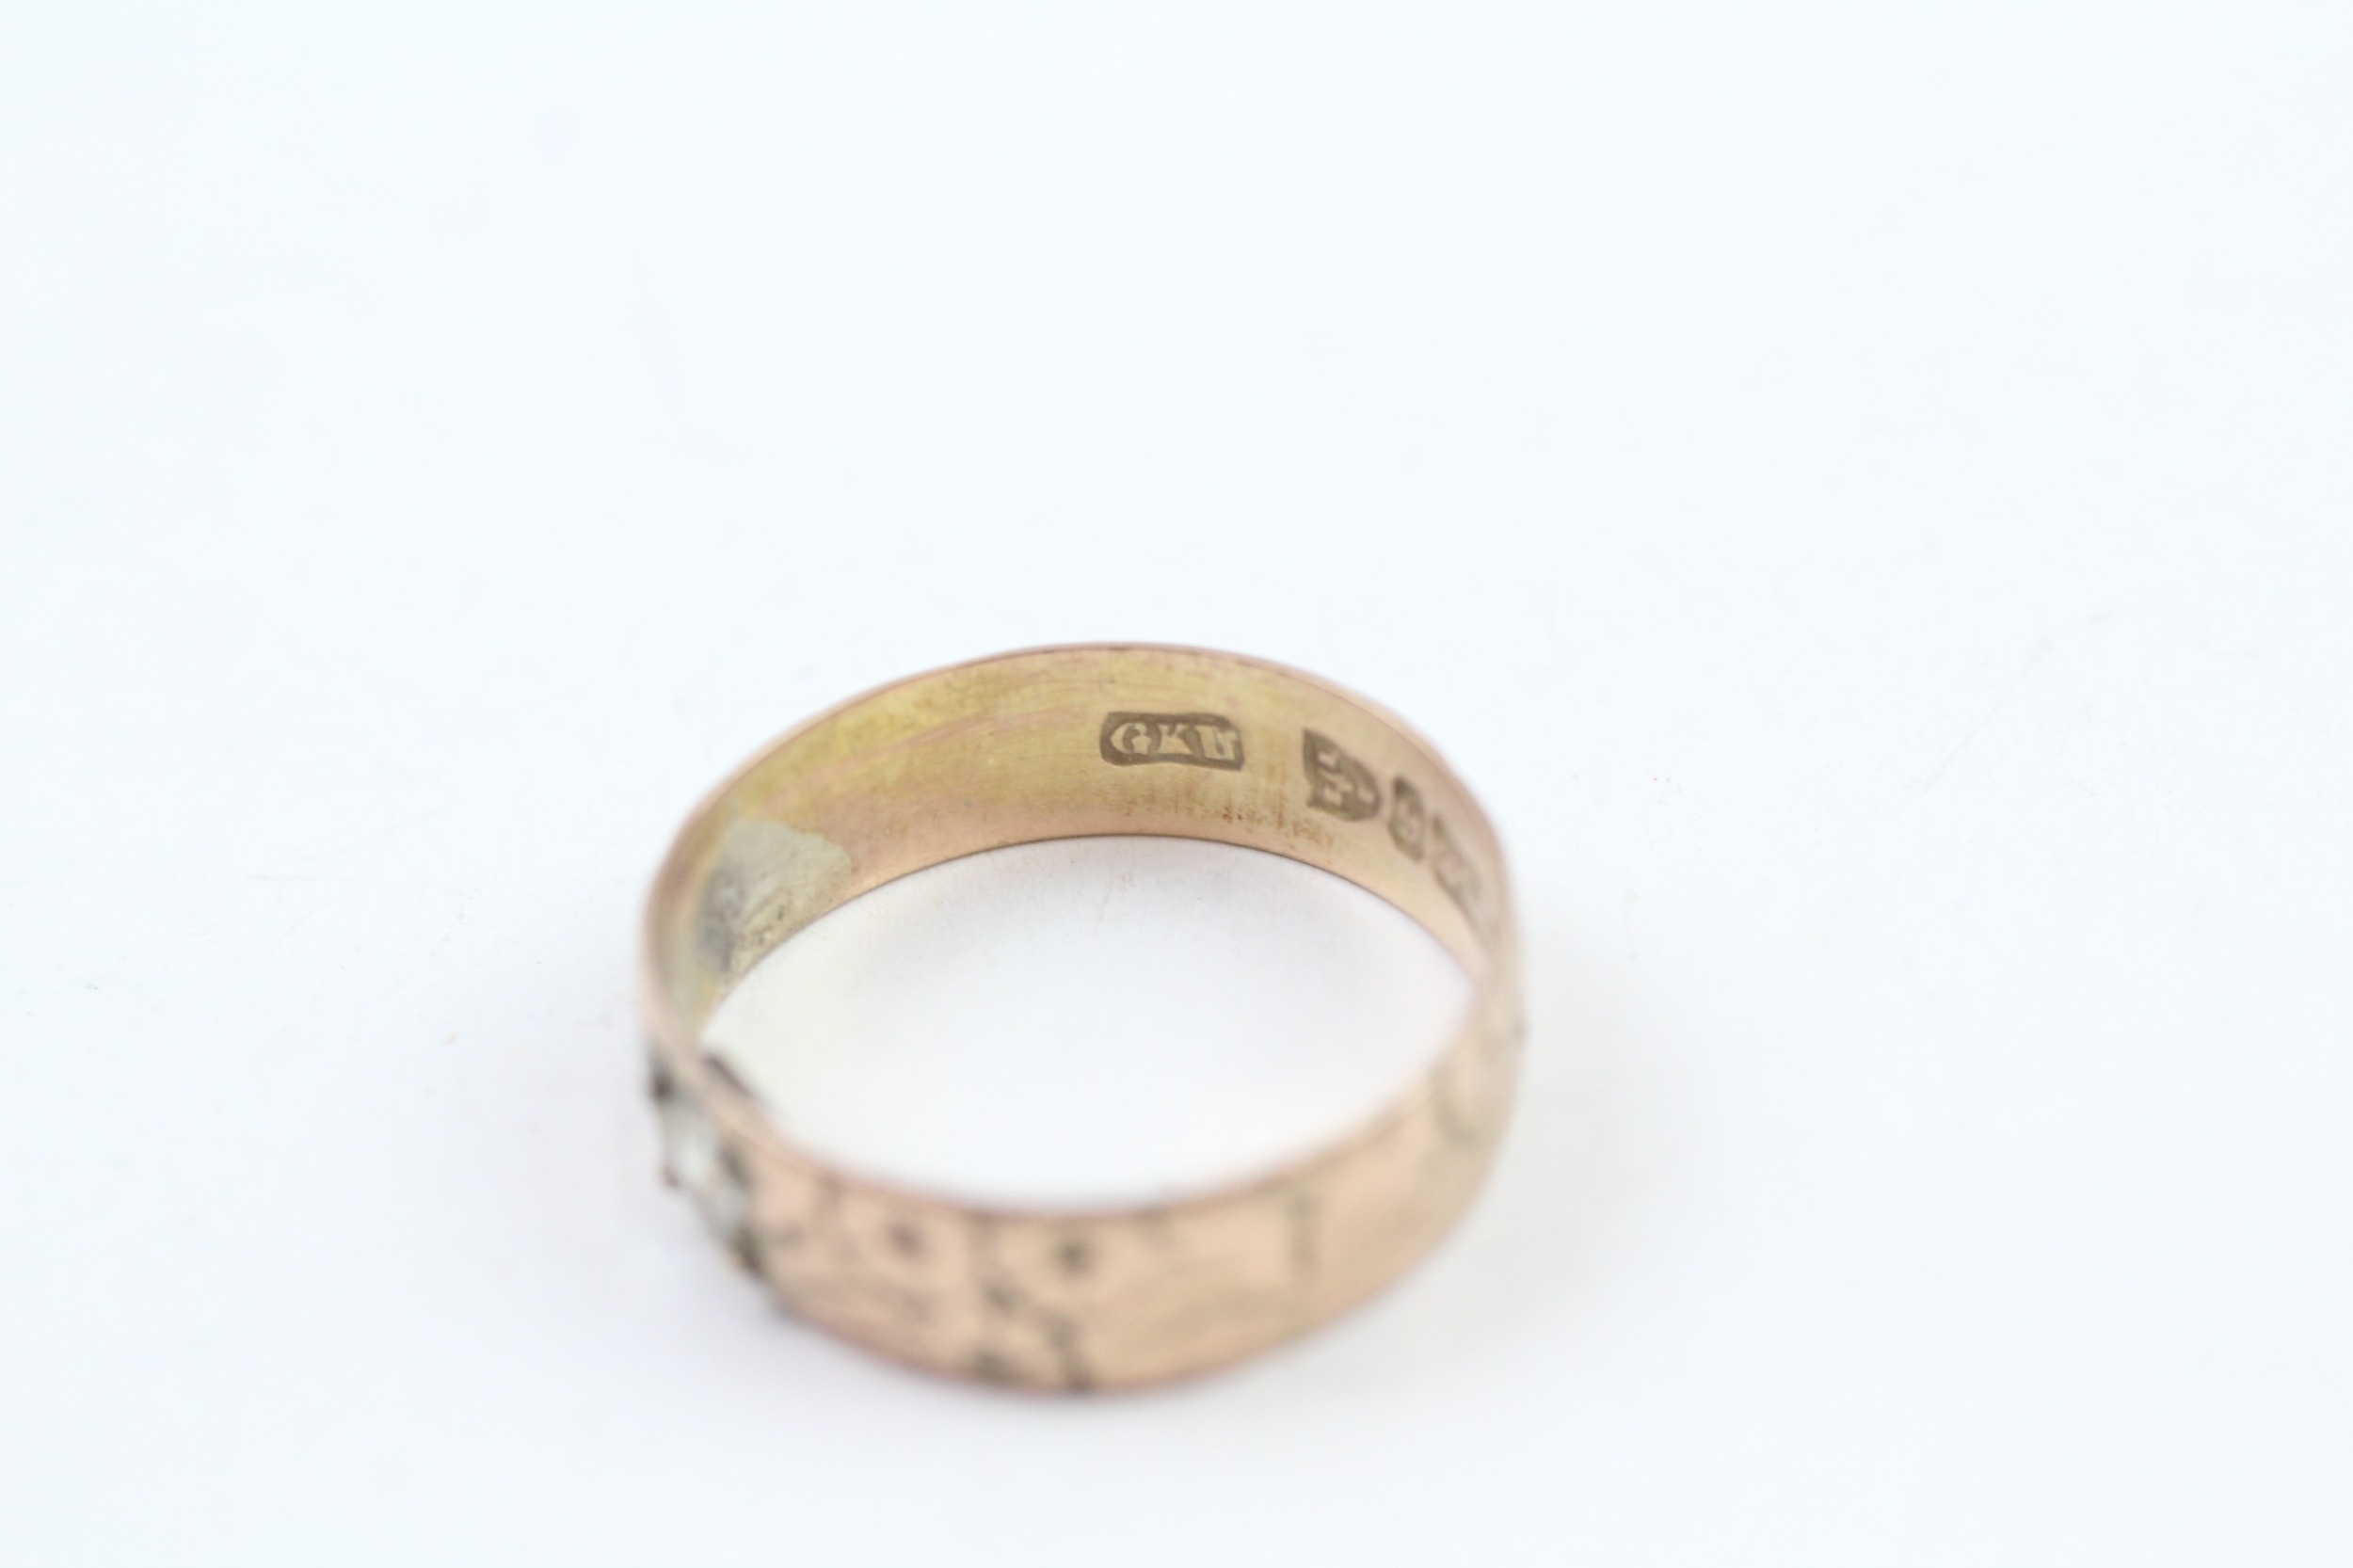 9ct gold patterned synthetic spinel ring, Hallmarked Chester 1899 (2.5g) - Image 4 of 5